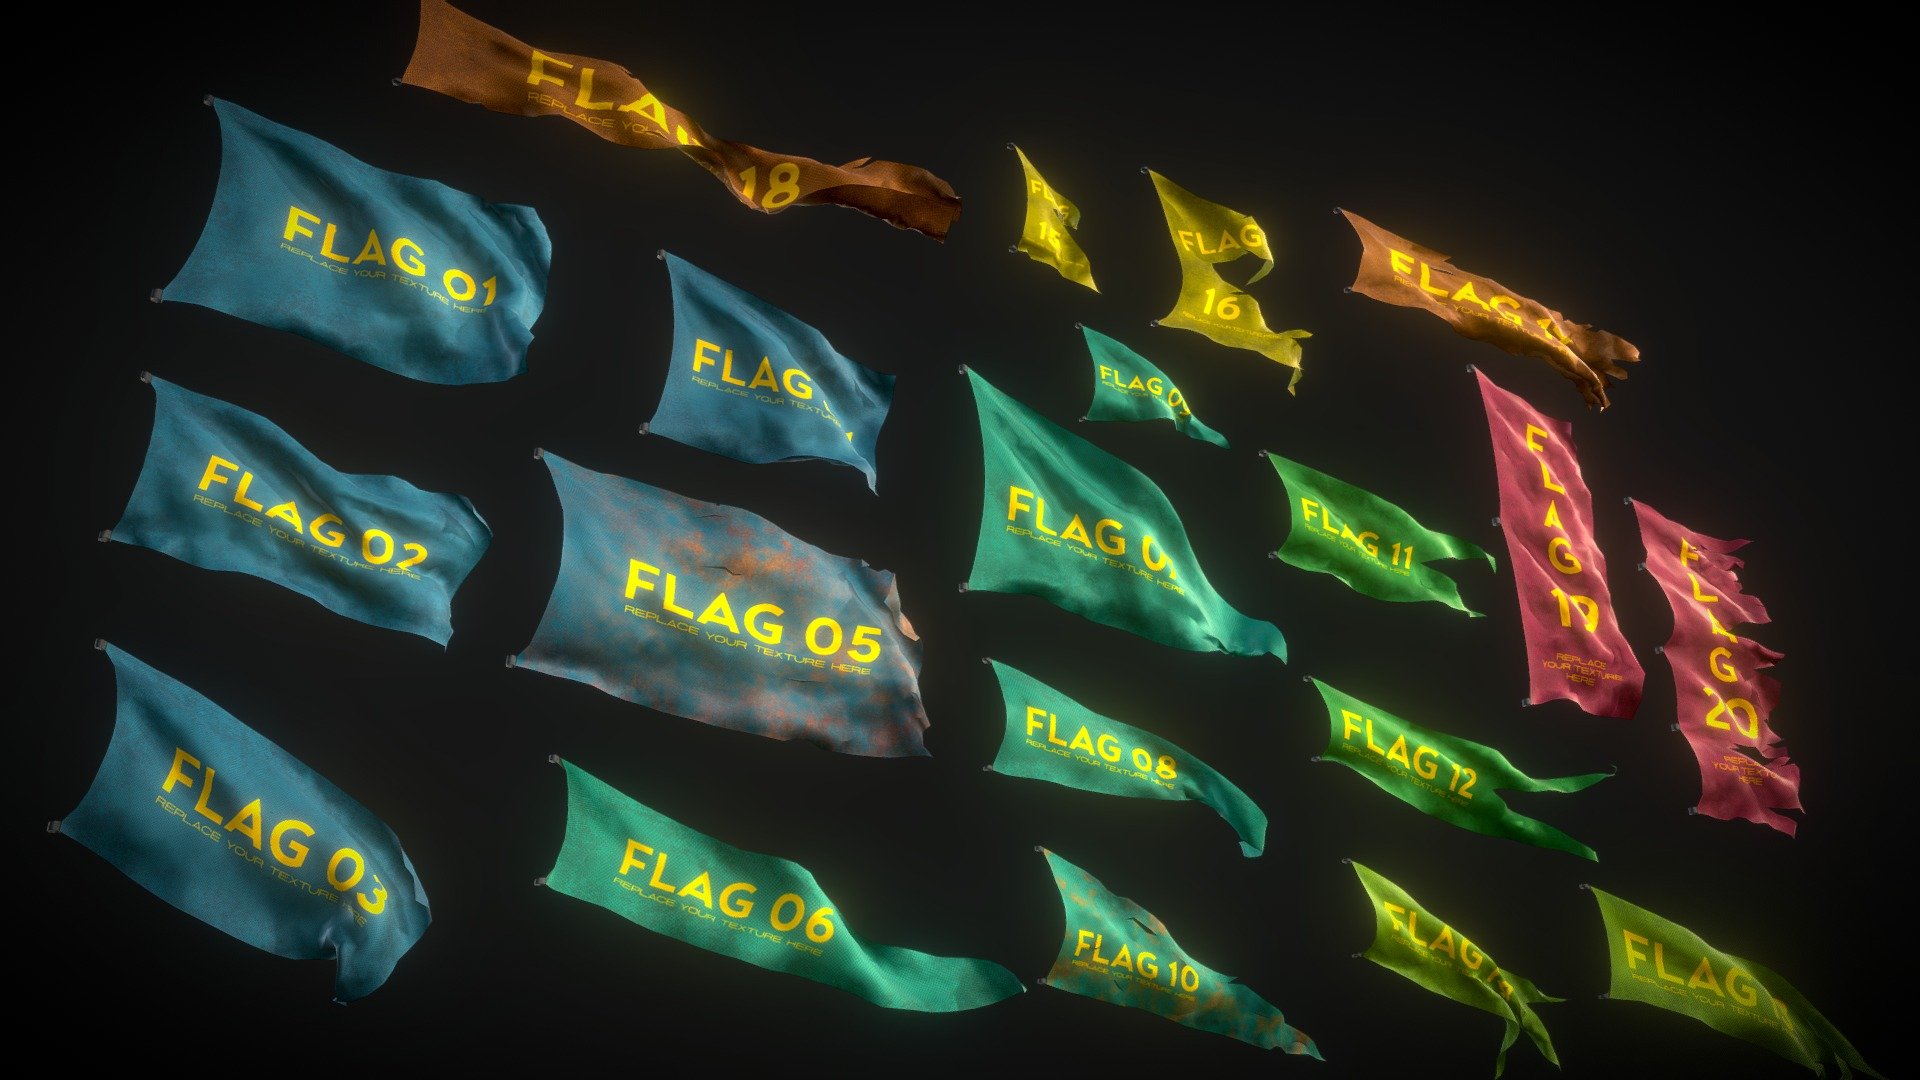 This pack includes 20 animated flag models that are prepared as almost lowpoly or midpoly.

Each flag is animated in 150 frames and is looped seamlessly.

To buy this pack search &ldquo;20 Fully Loop Animated Flags